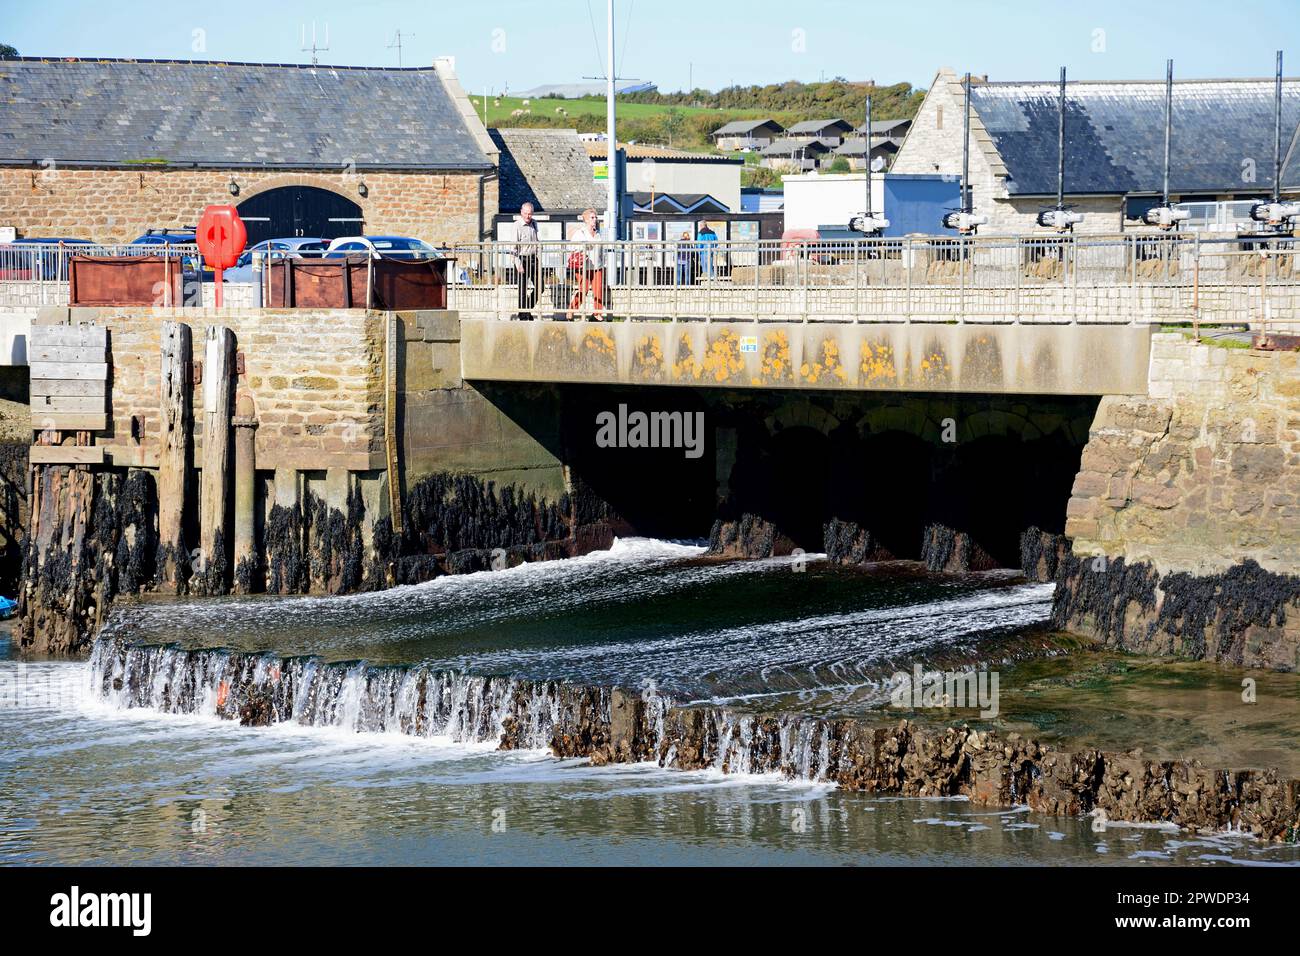 View of the sluice gate in the harbour at low tide, West Bay, Dorset, UK, Europe. Stock Photo